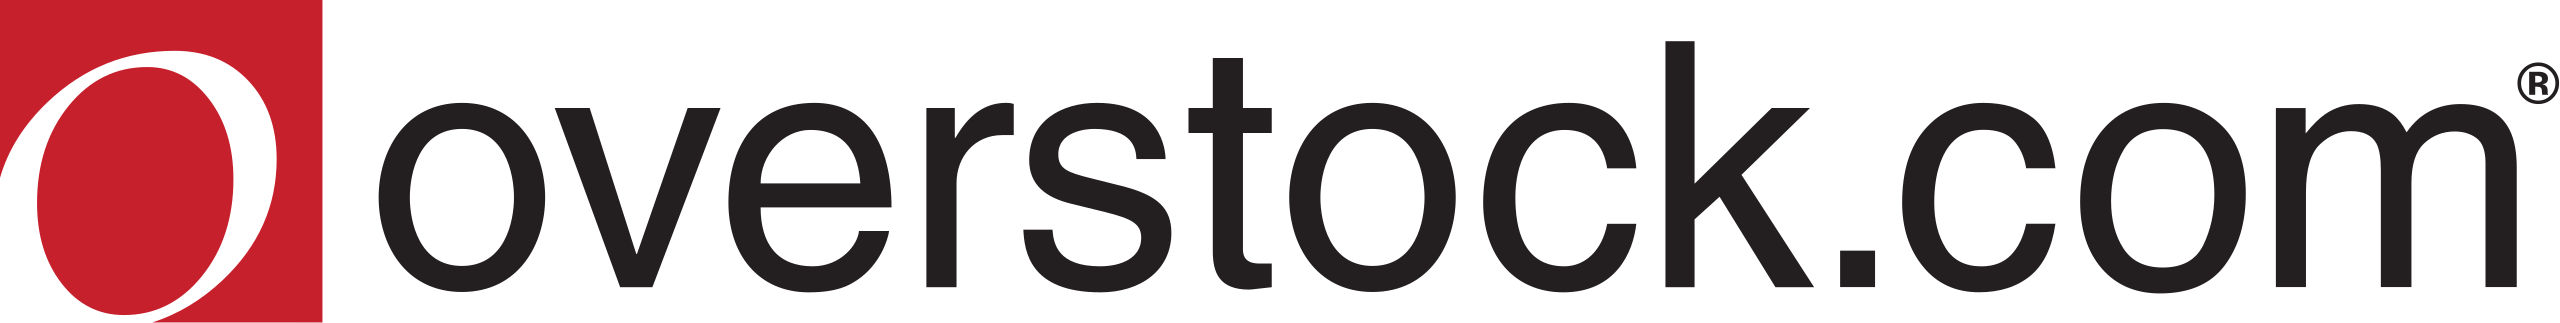 https://upload.wikimedia.org/wikipedia/commons/thumb/a/a6/Overstock.com_logo.svg/2560px-Overstock.com_logo.svg.png